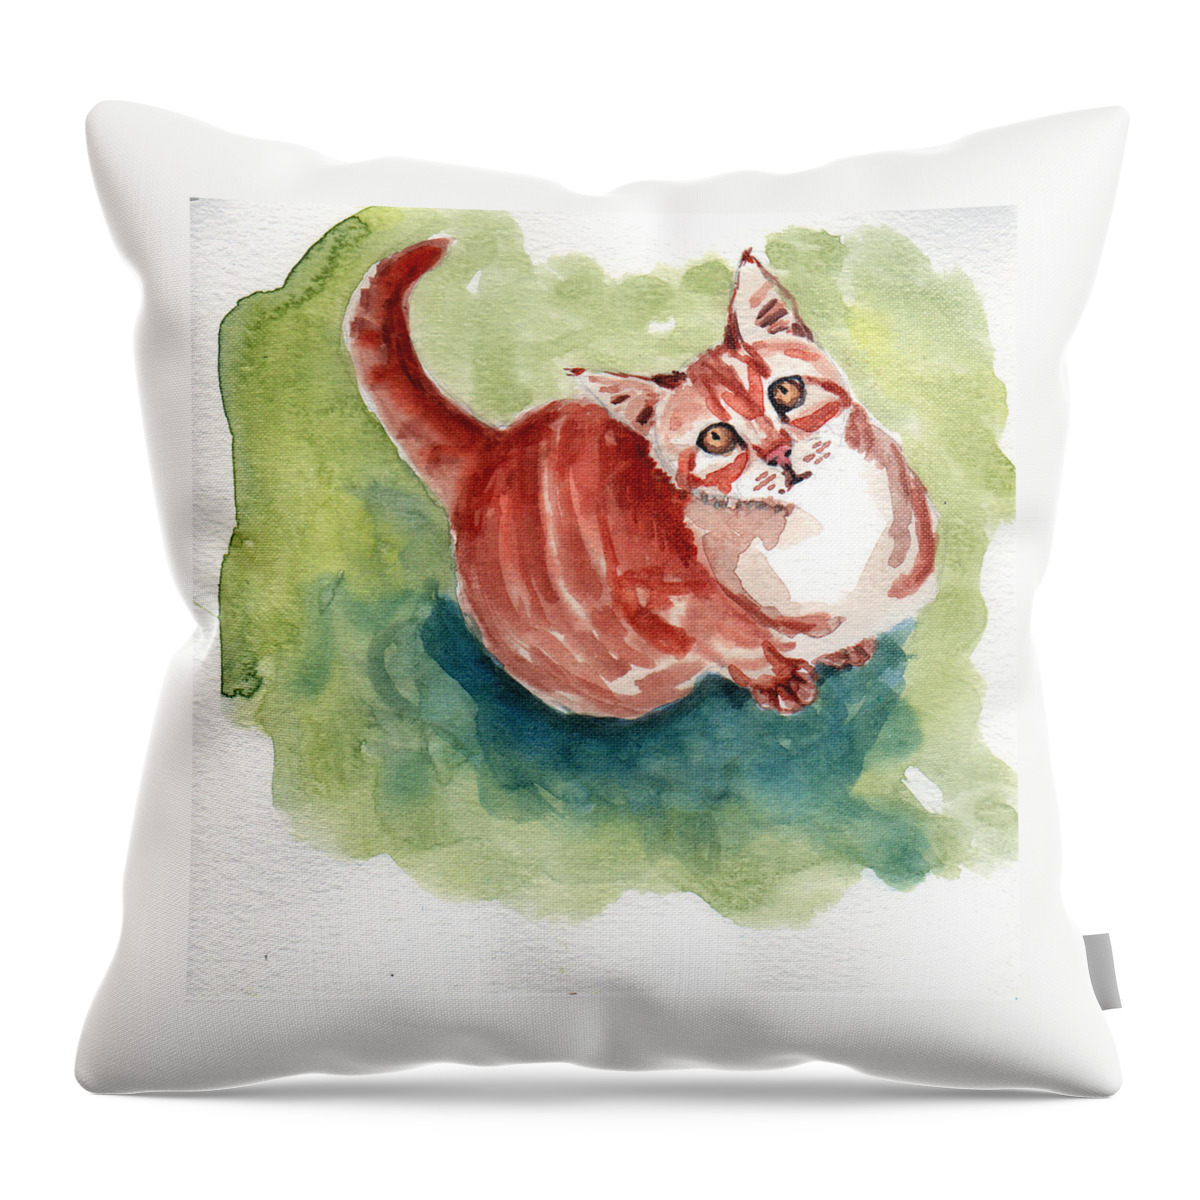  Throw Pillow featuring the painting Ginger tabby 8 by Mimi Boothby